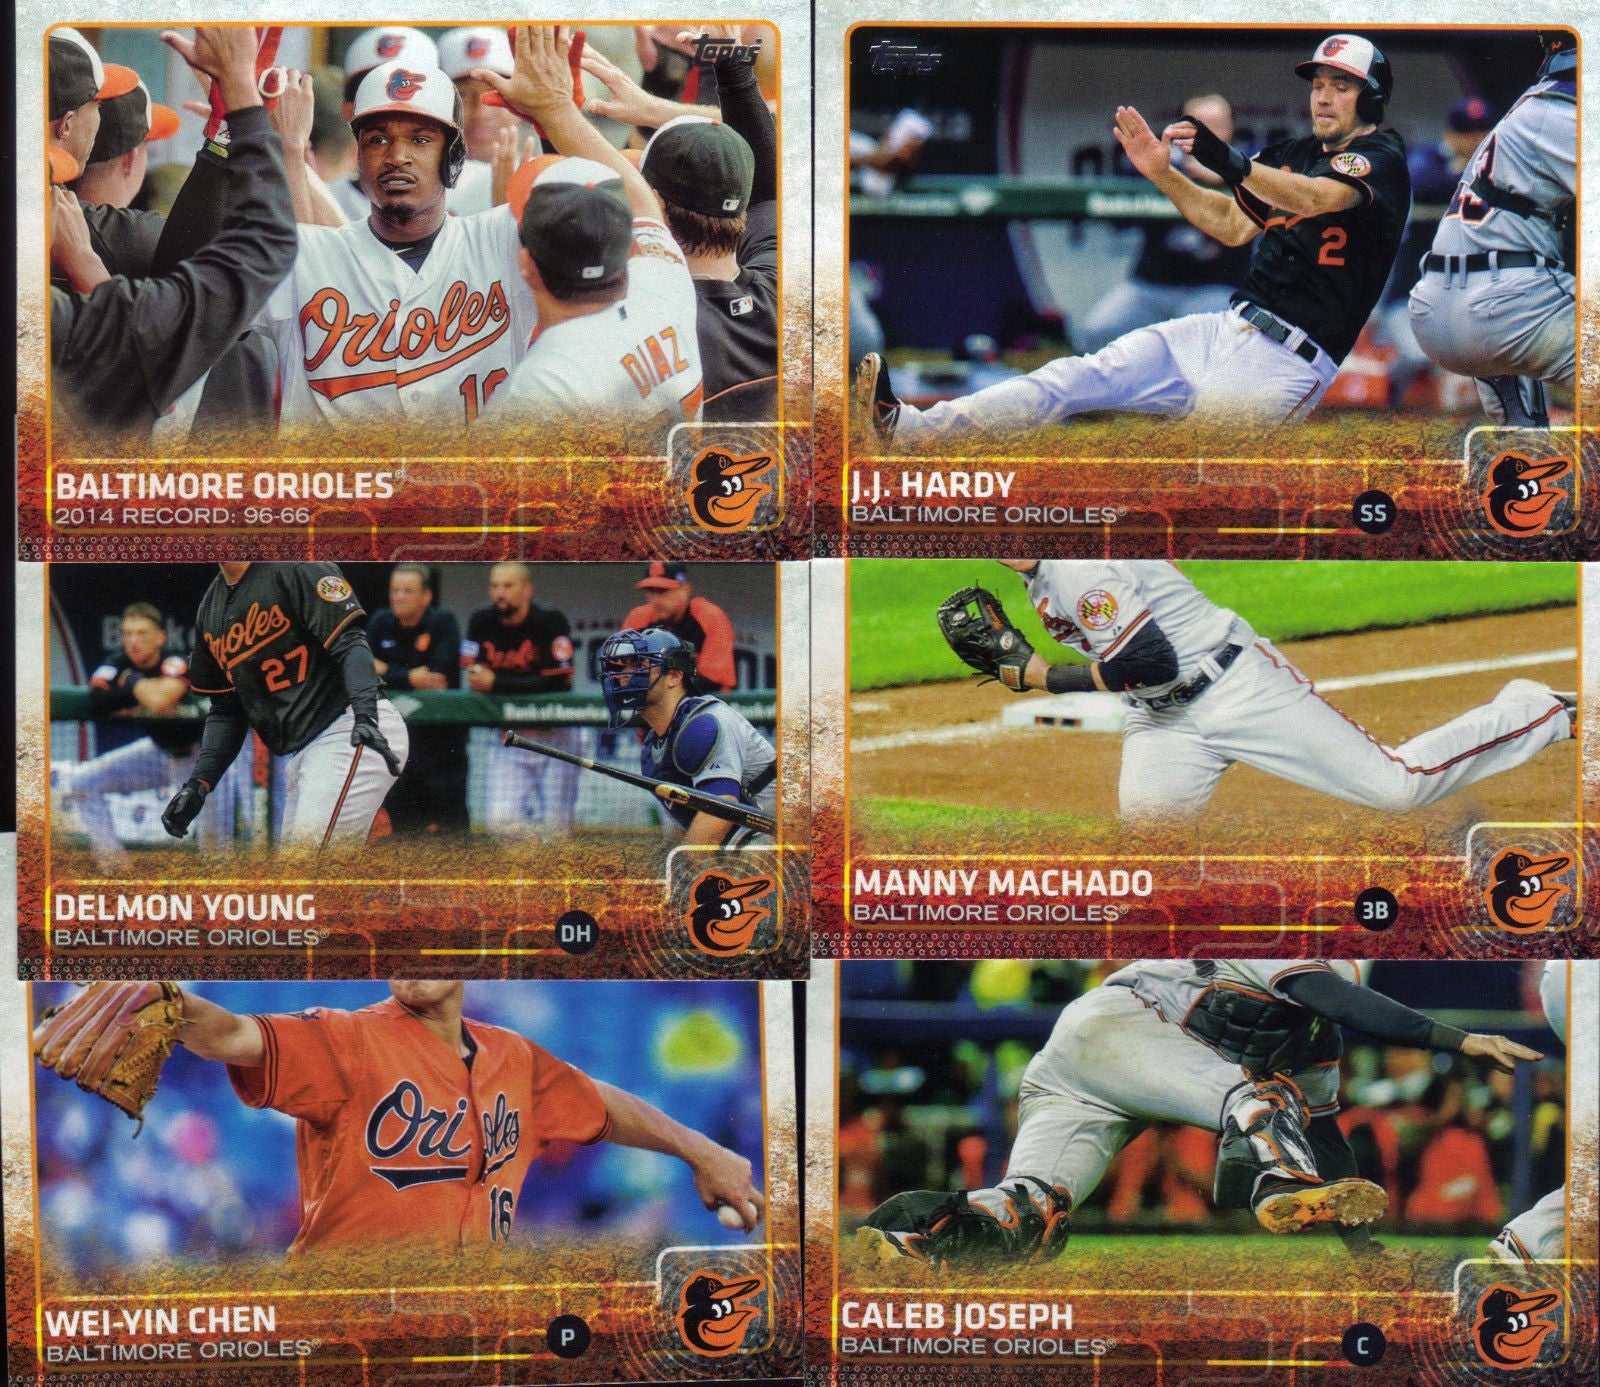 2015 Topps Baseball Cards St. Louis Cardinals Team Set shipped in